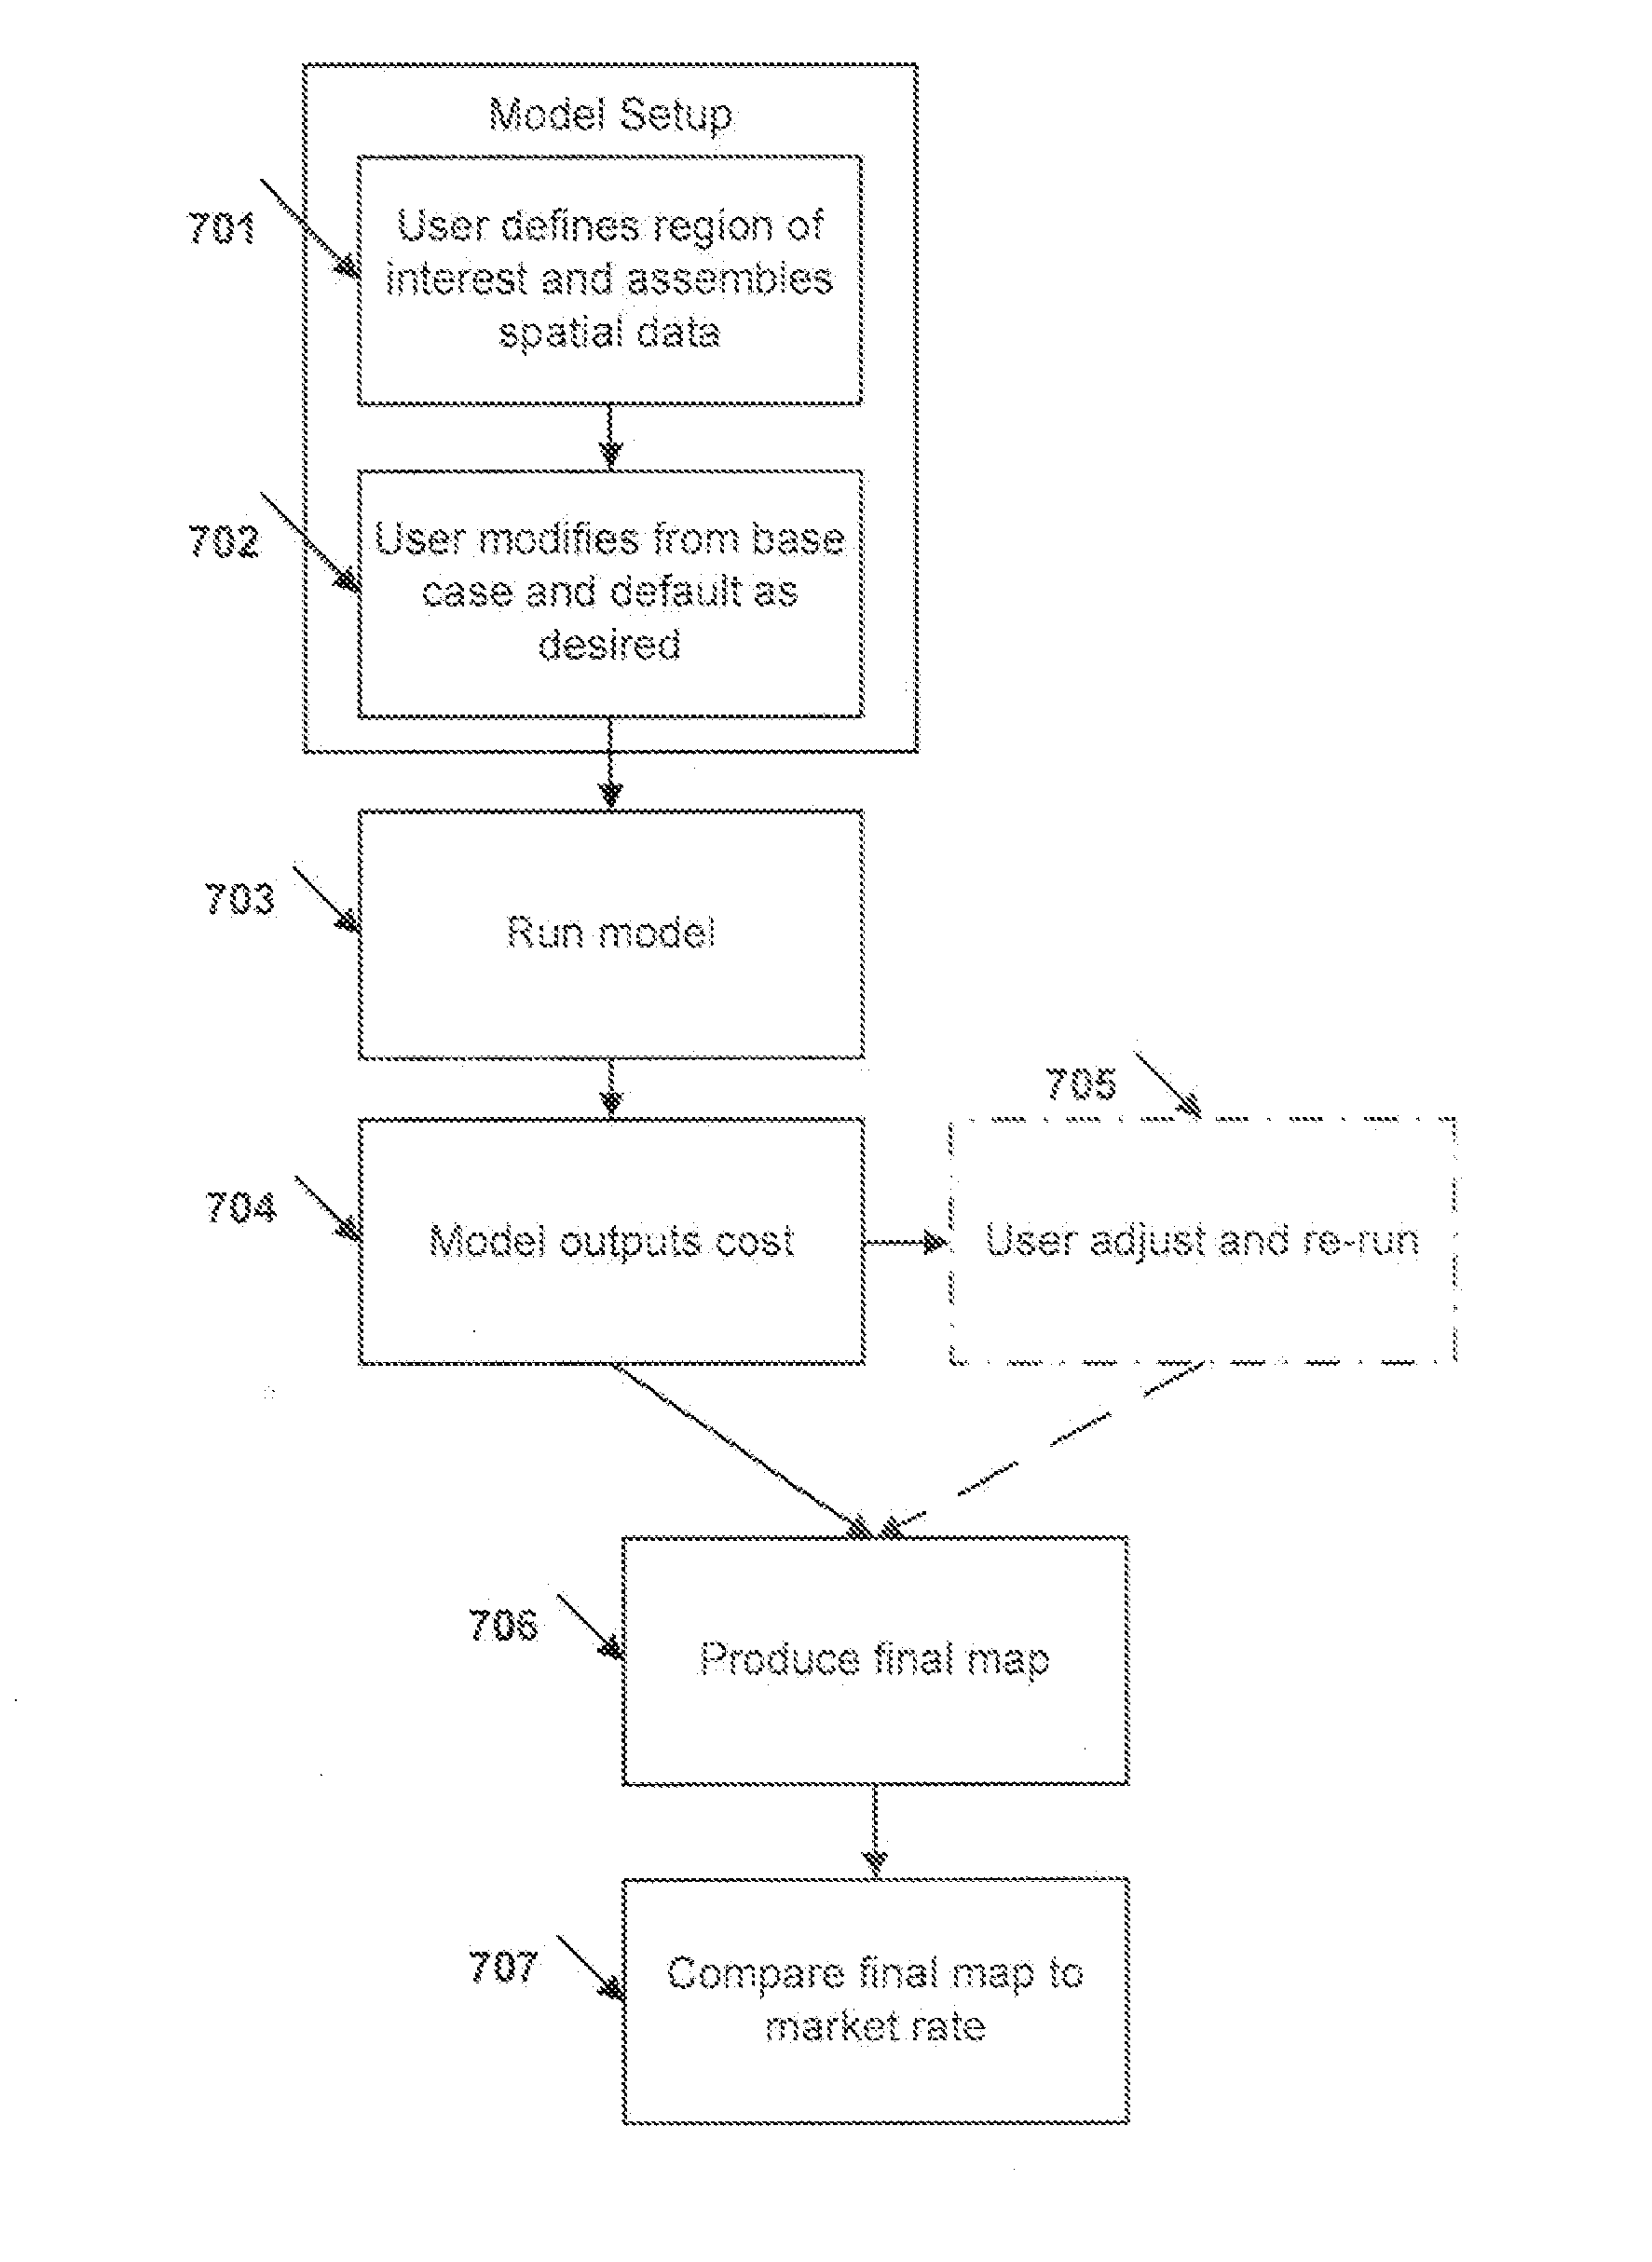 System and method for determining the most favorable locations for enhanced geothermal system applications